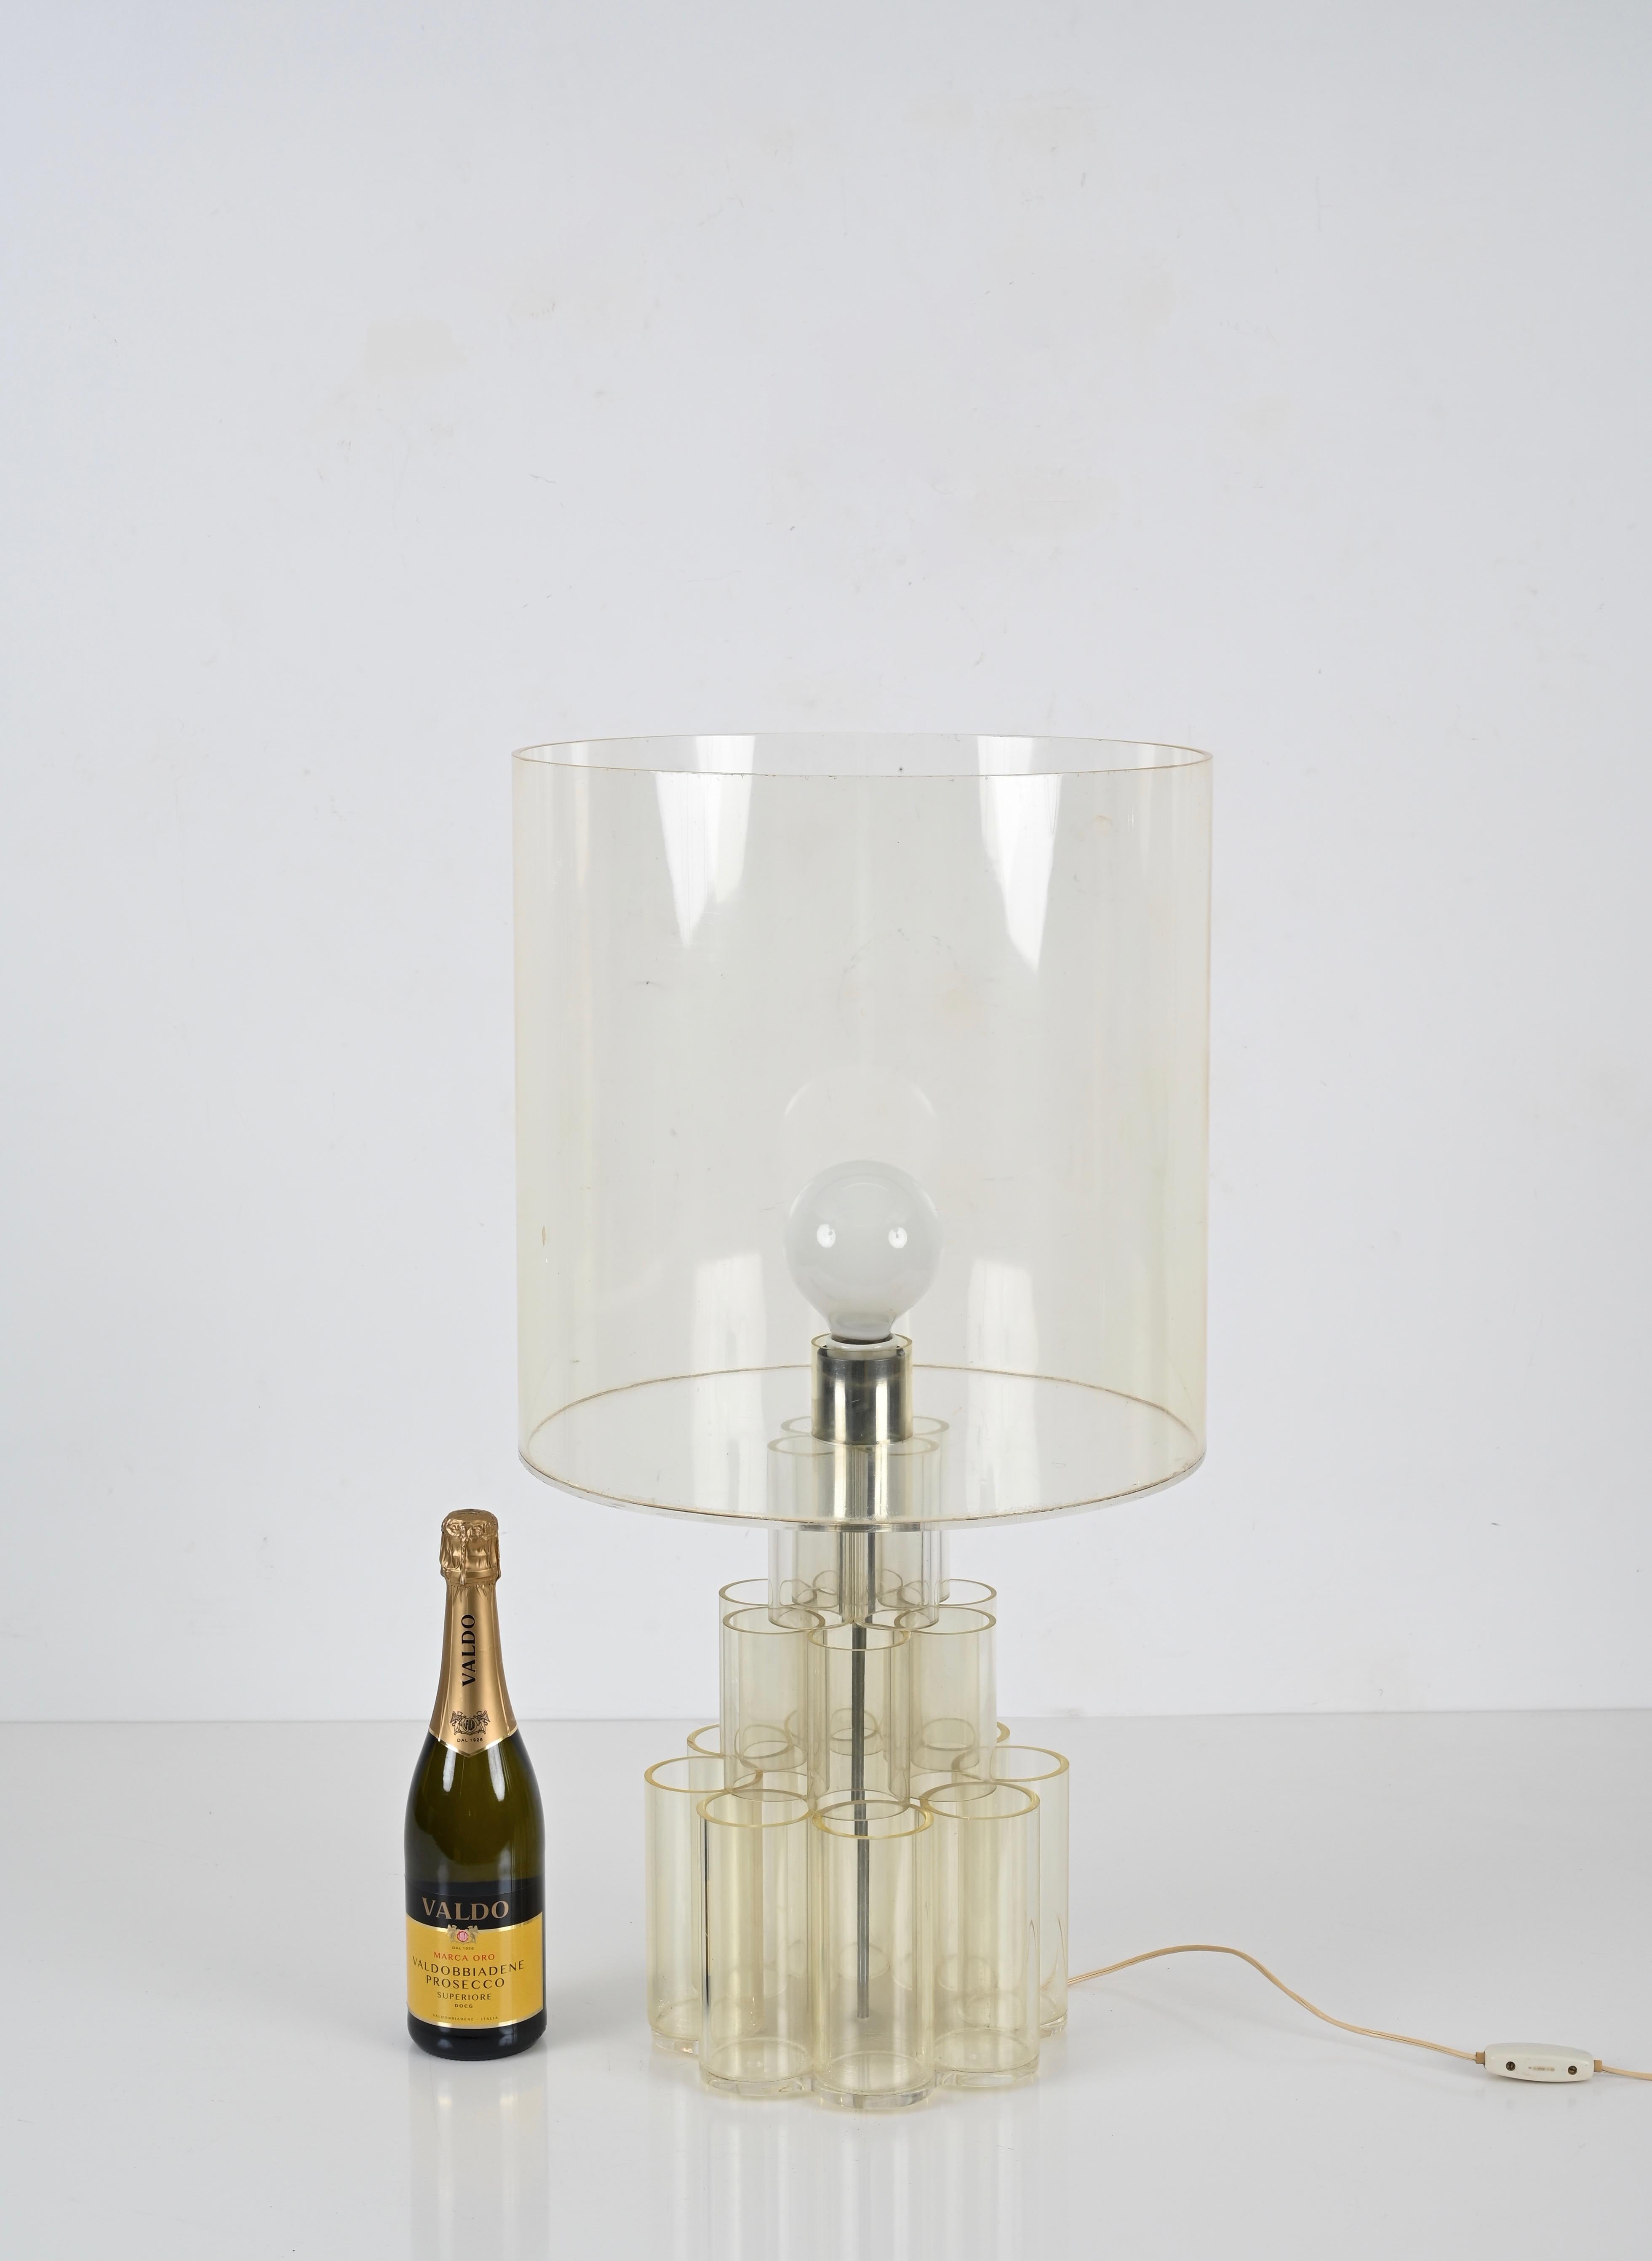 Stunning table lamp fully made in clear lucite. This large and unique lamp was made in Italy during the 1970s, clearly in the style of Verner Panton. 

The body of the lamp is composed by a serie of thick cylinders made in clear lucite, 8 on the